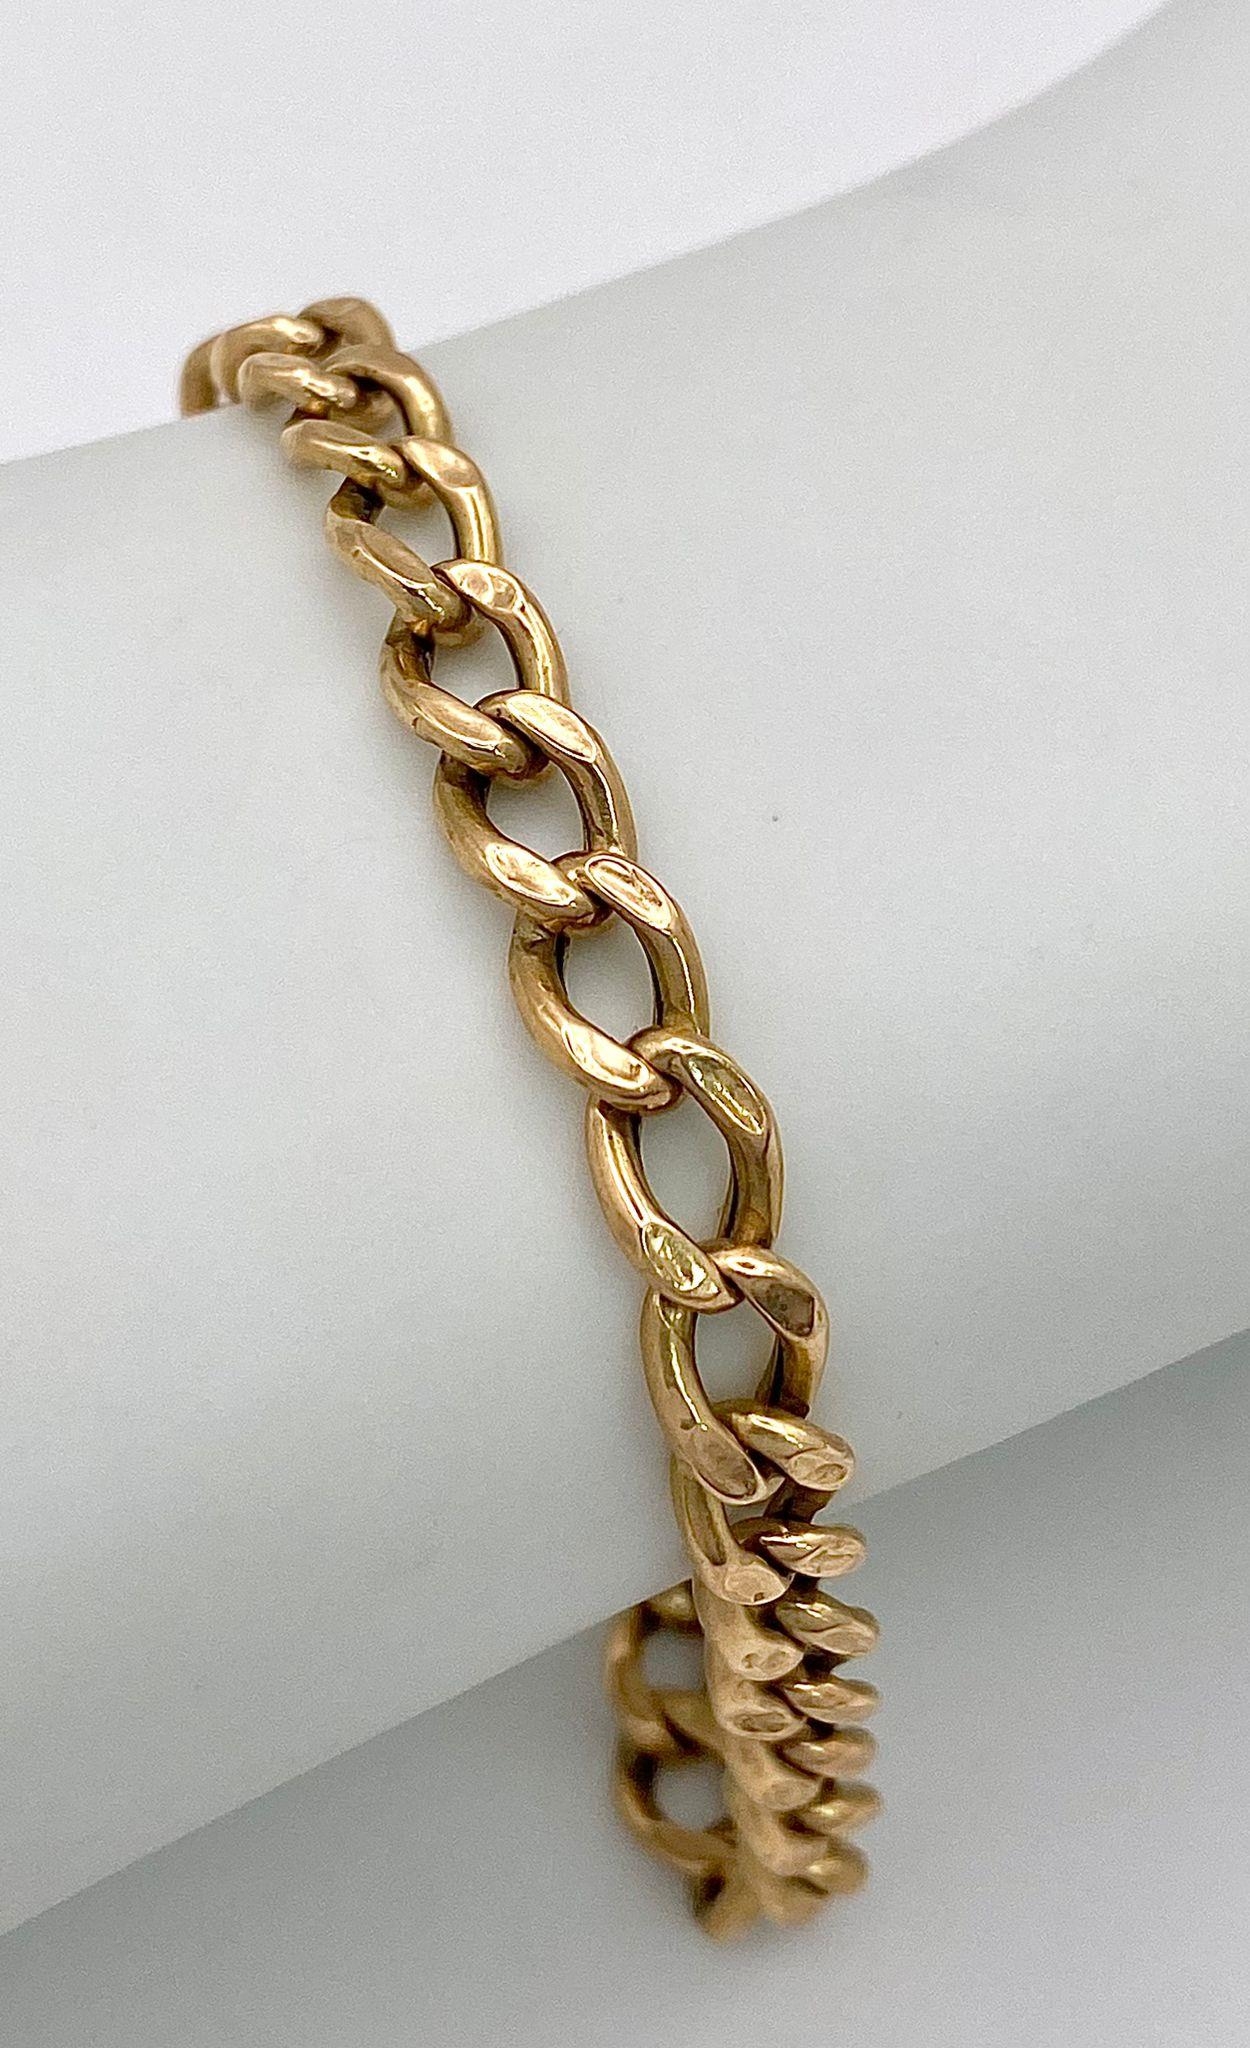 An 18K Yellow Gold Flat Curb Link Bracelet. 19cm. 4.25g weight. - Image 3 of 6